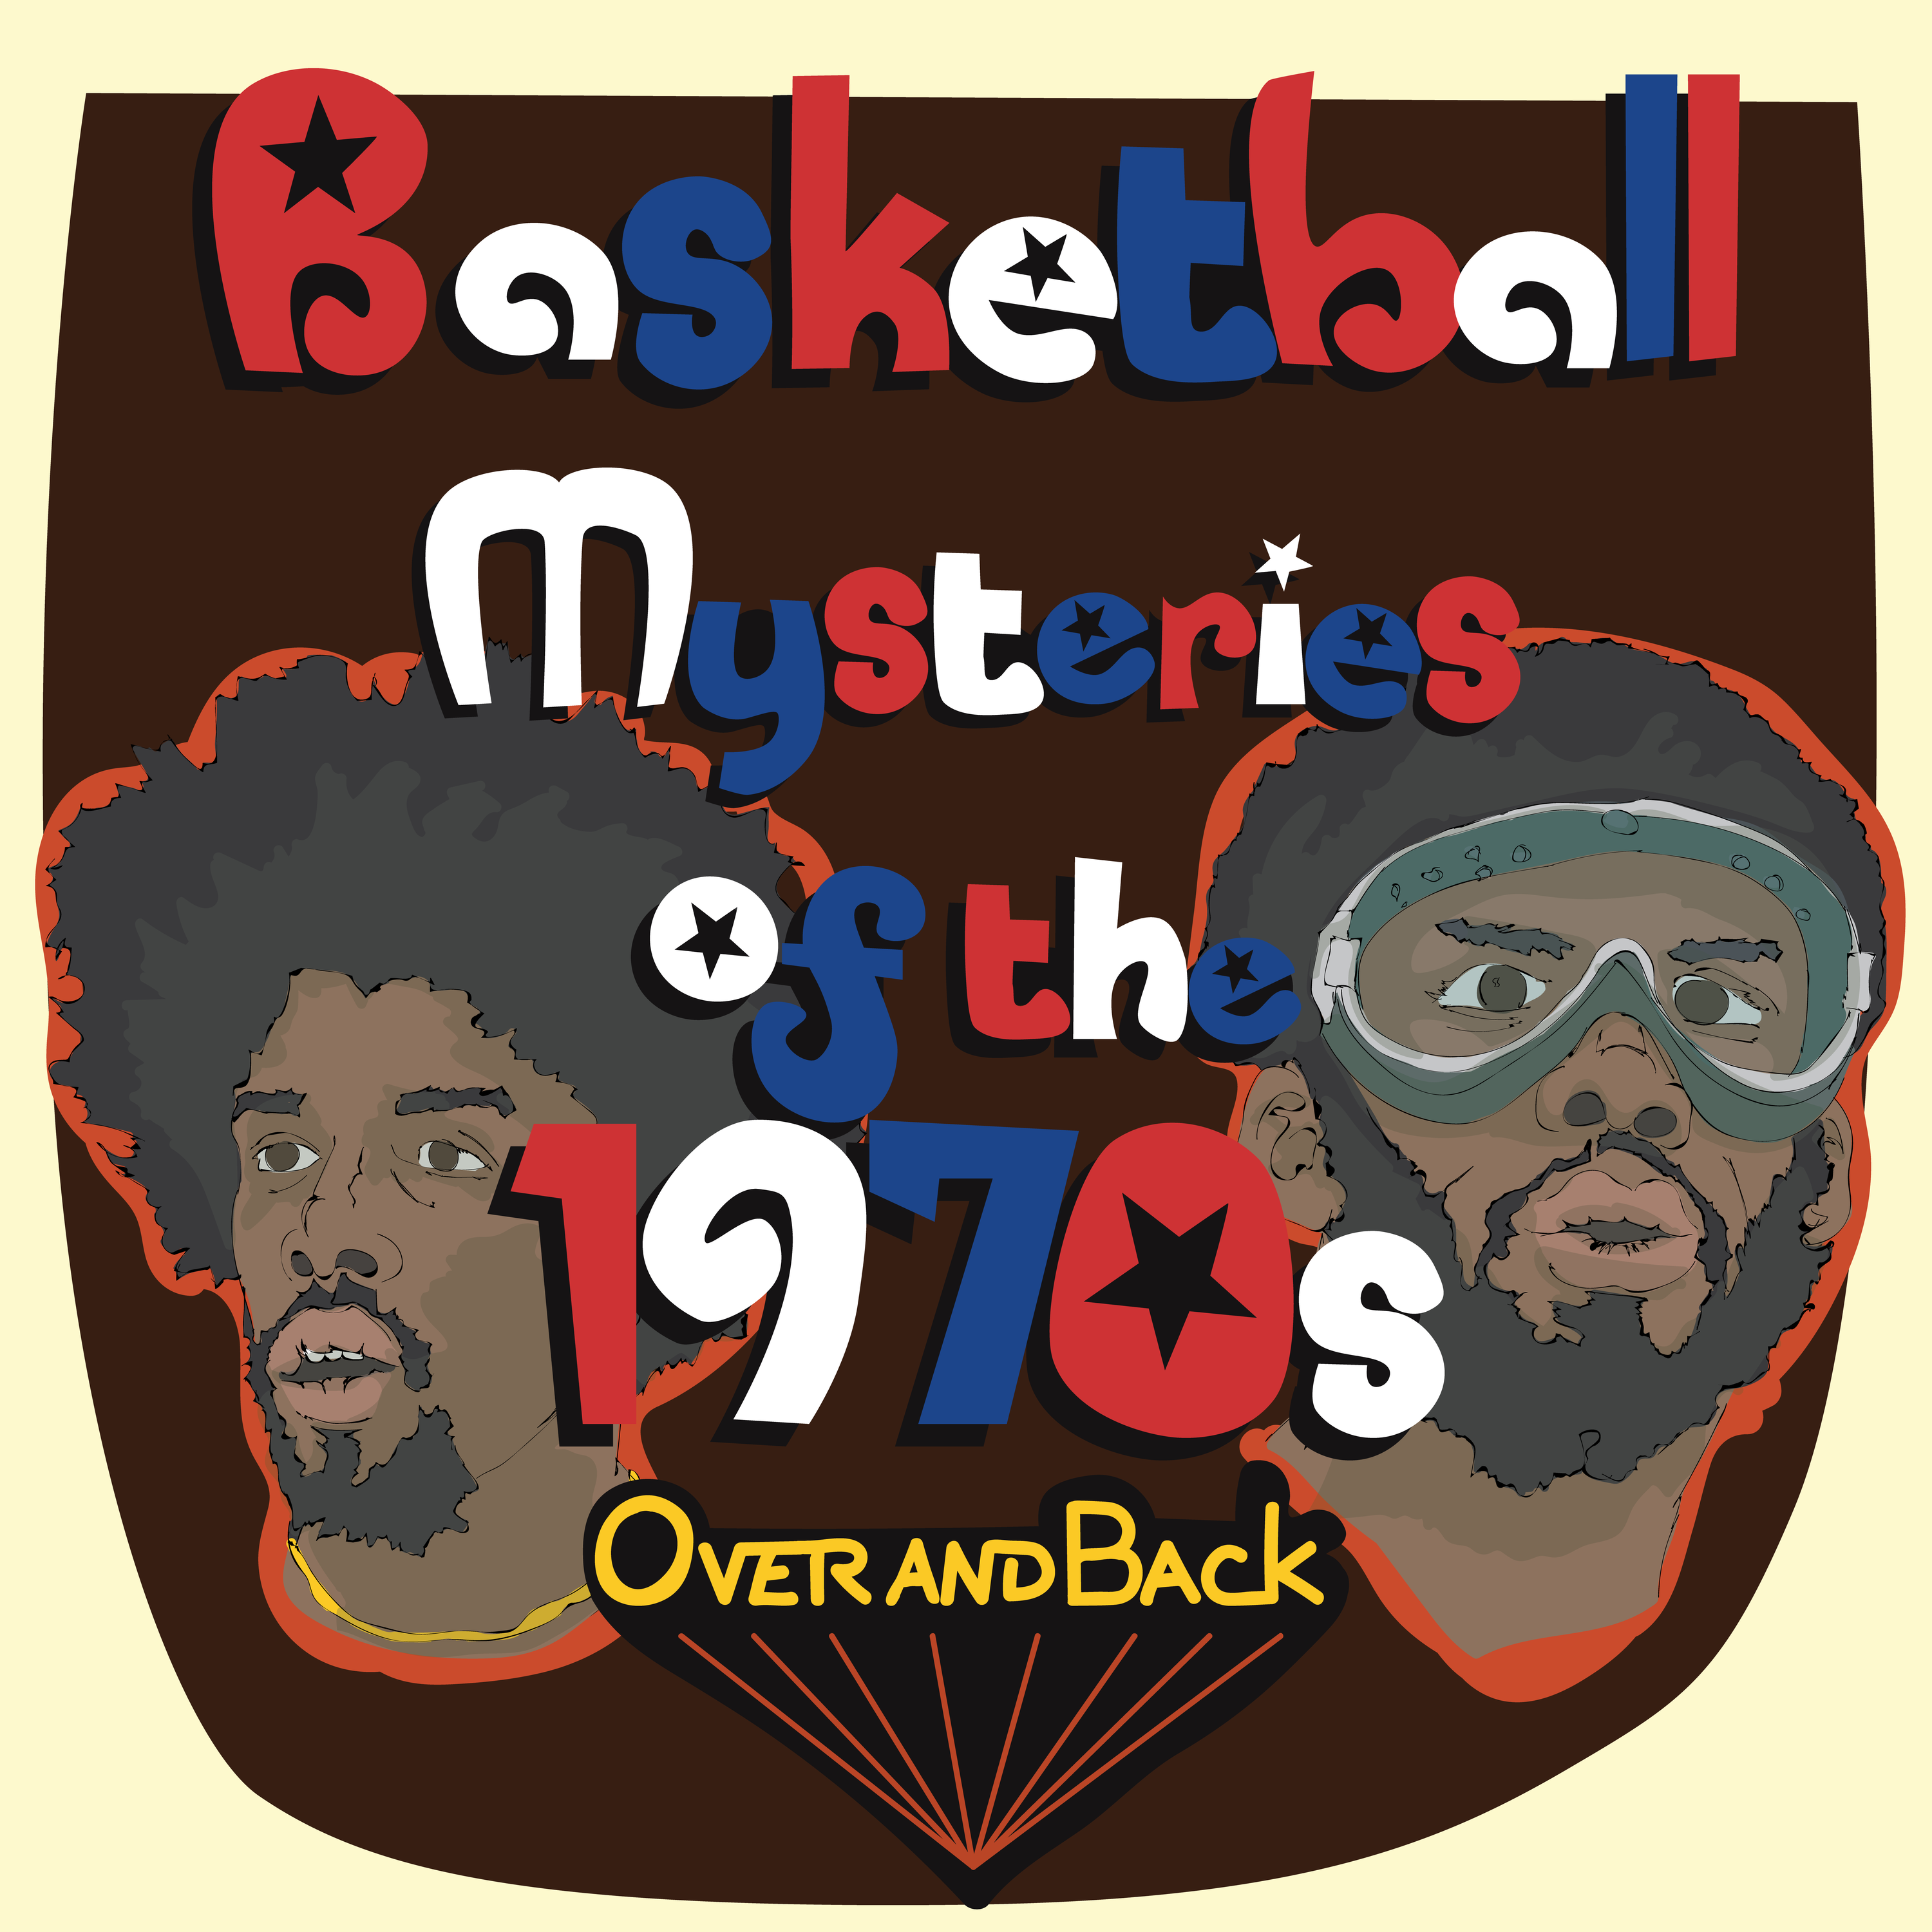 How did Dr. J become an ABA legend? (Basketball Mysteries of the 1970s #21)